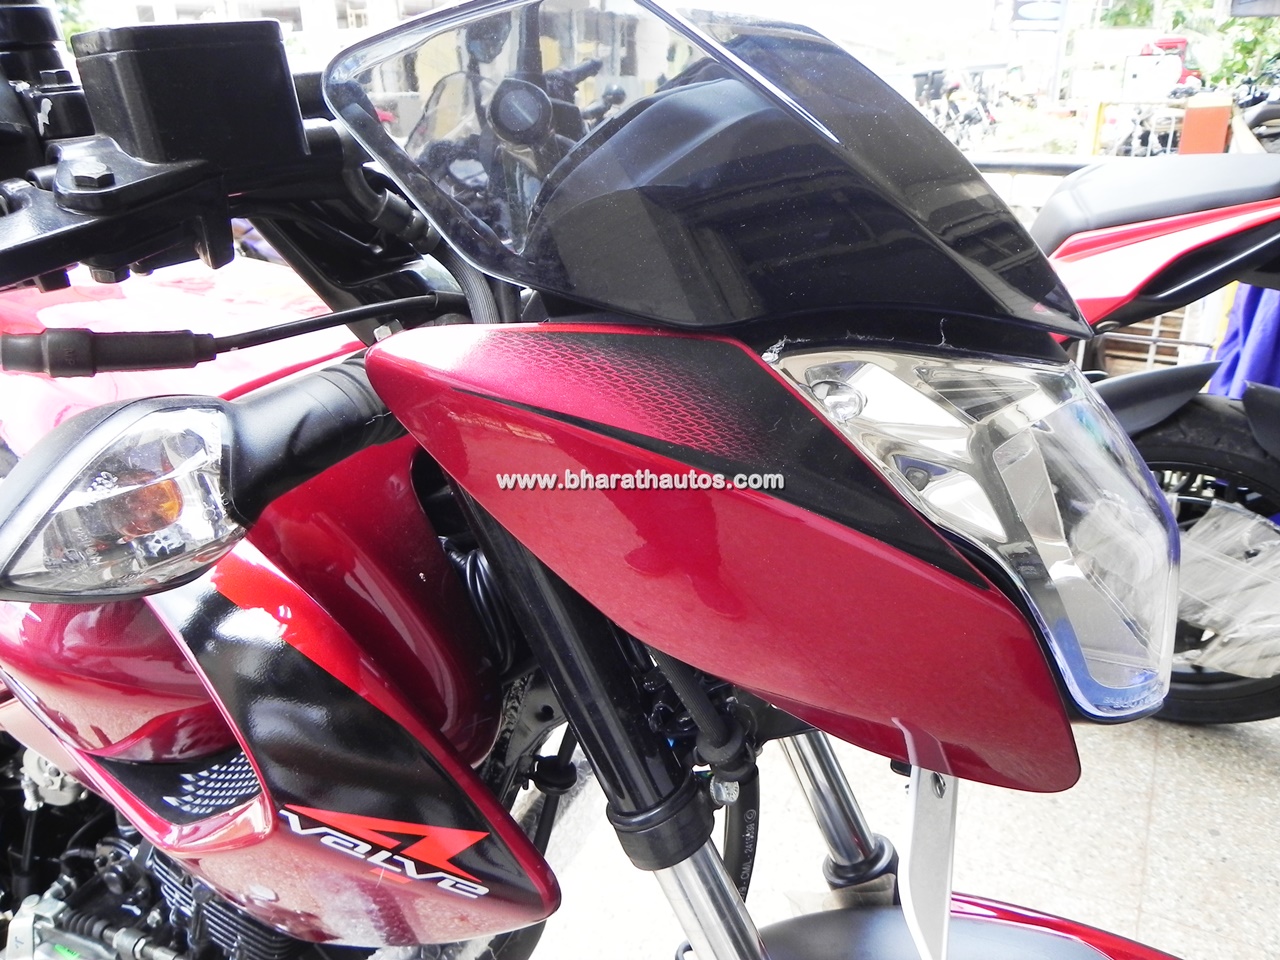 Bajaj Pulsar 135 Ls Now In Cocktail Wine Red Colour Prices Slashed